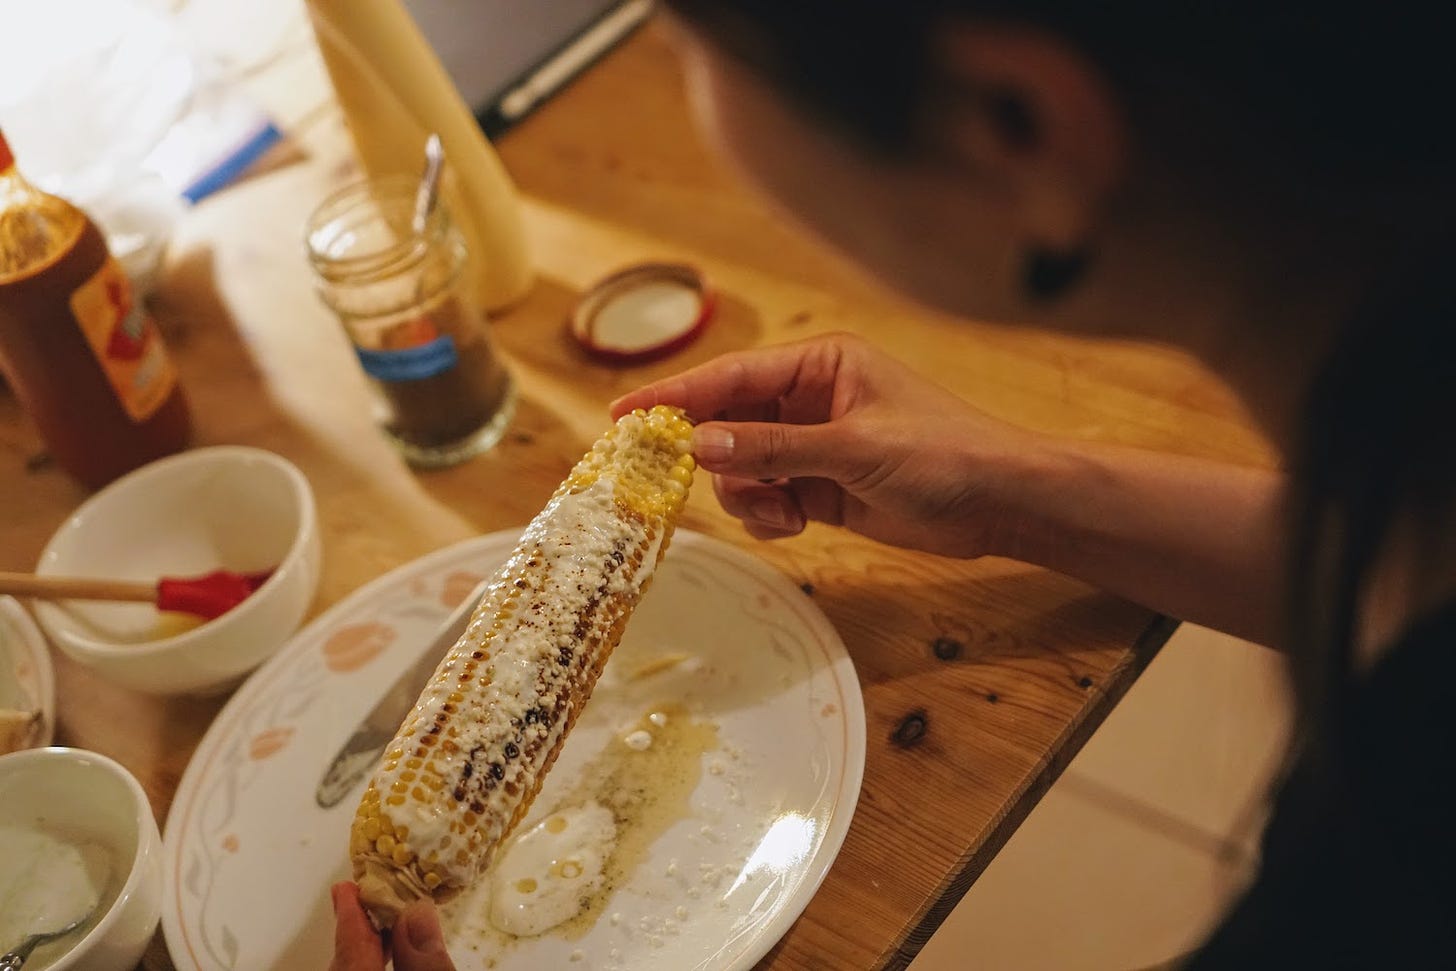 Grilled corn topped with butter and cheese in Yoko's hands